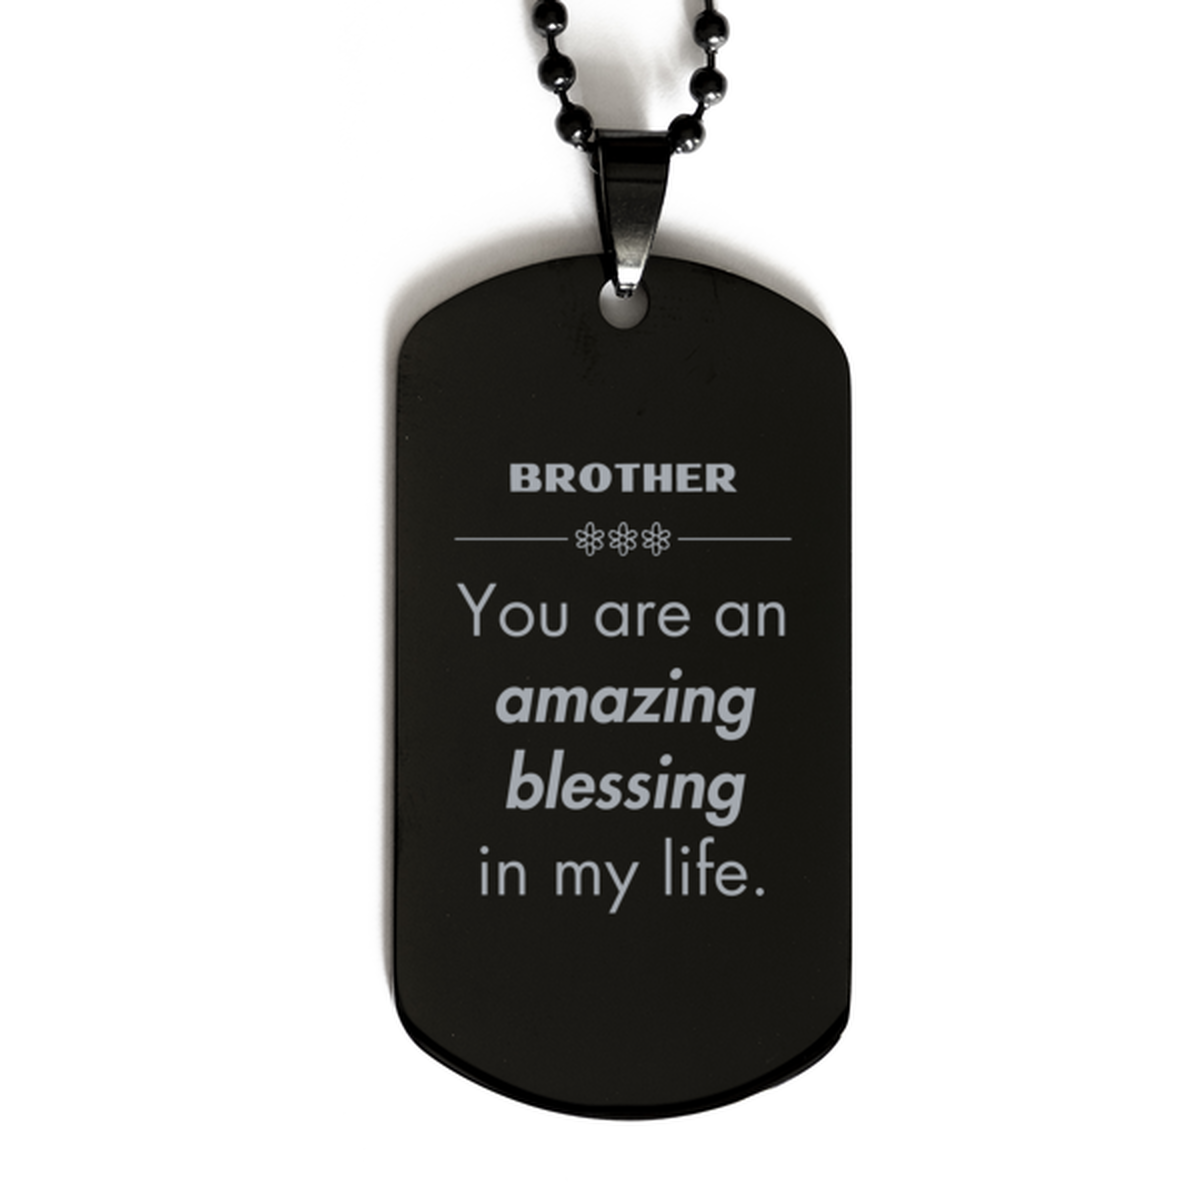 Brother Black Dog Tag, You are an amazing blessing in my life, Thank You Gifts For Brother, Inspirational Birthday Christmas Unique Gifts For Brother